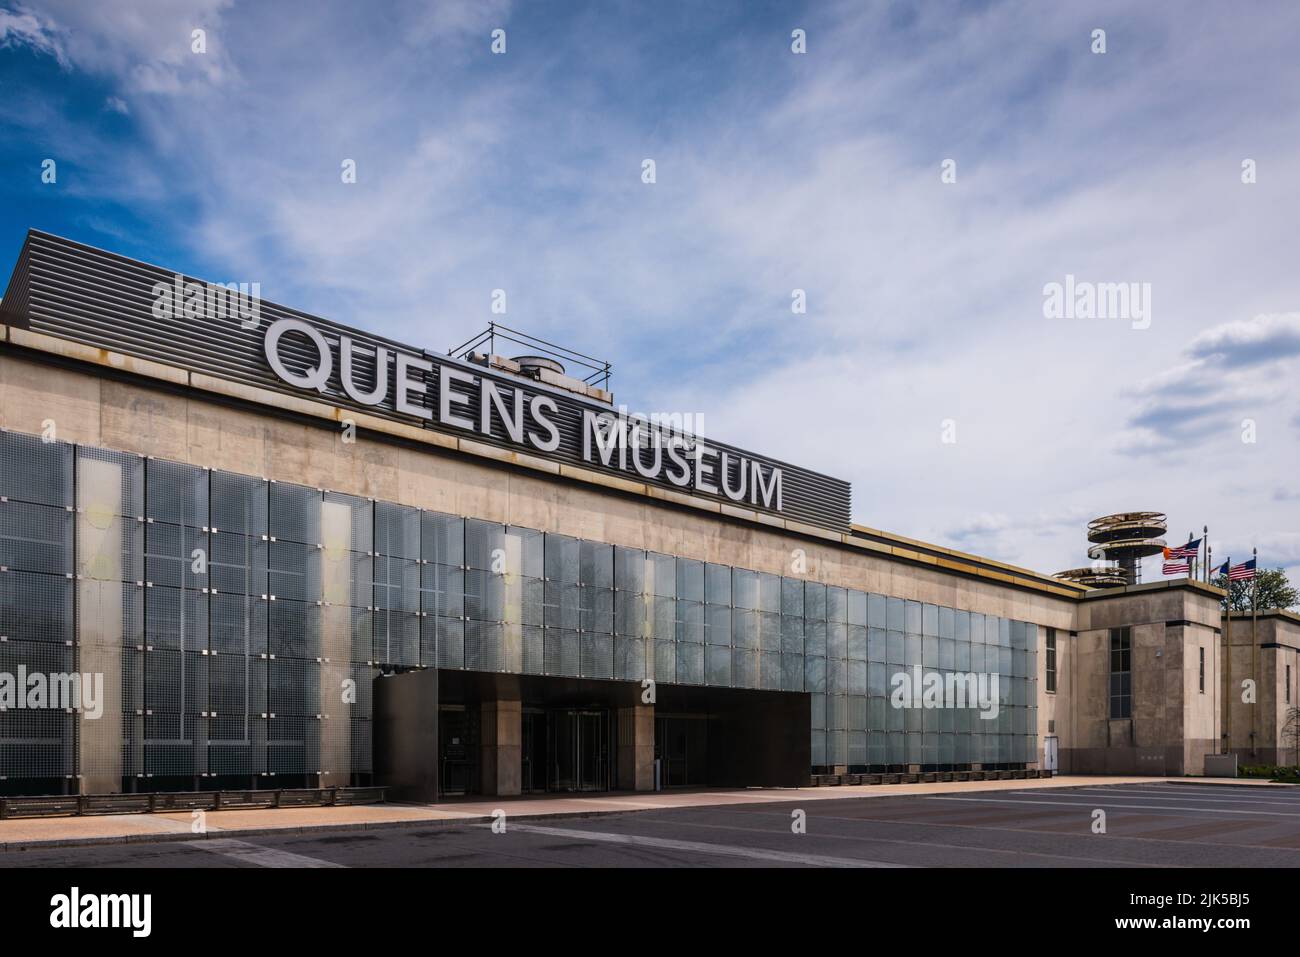 New York, NY/USA - 05-09-2016: The Queens Museum, formerly the Queens Museum of Art, is an art museum and educational center located in Flushing Meado Stock Photo